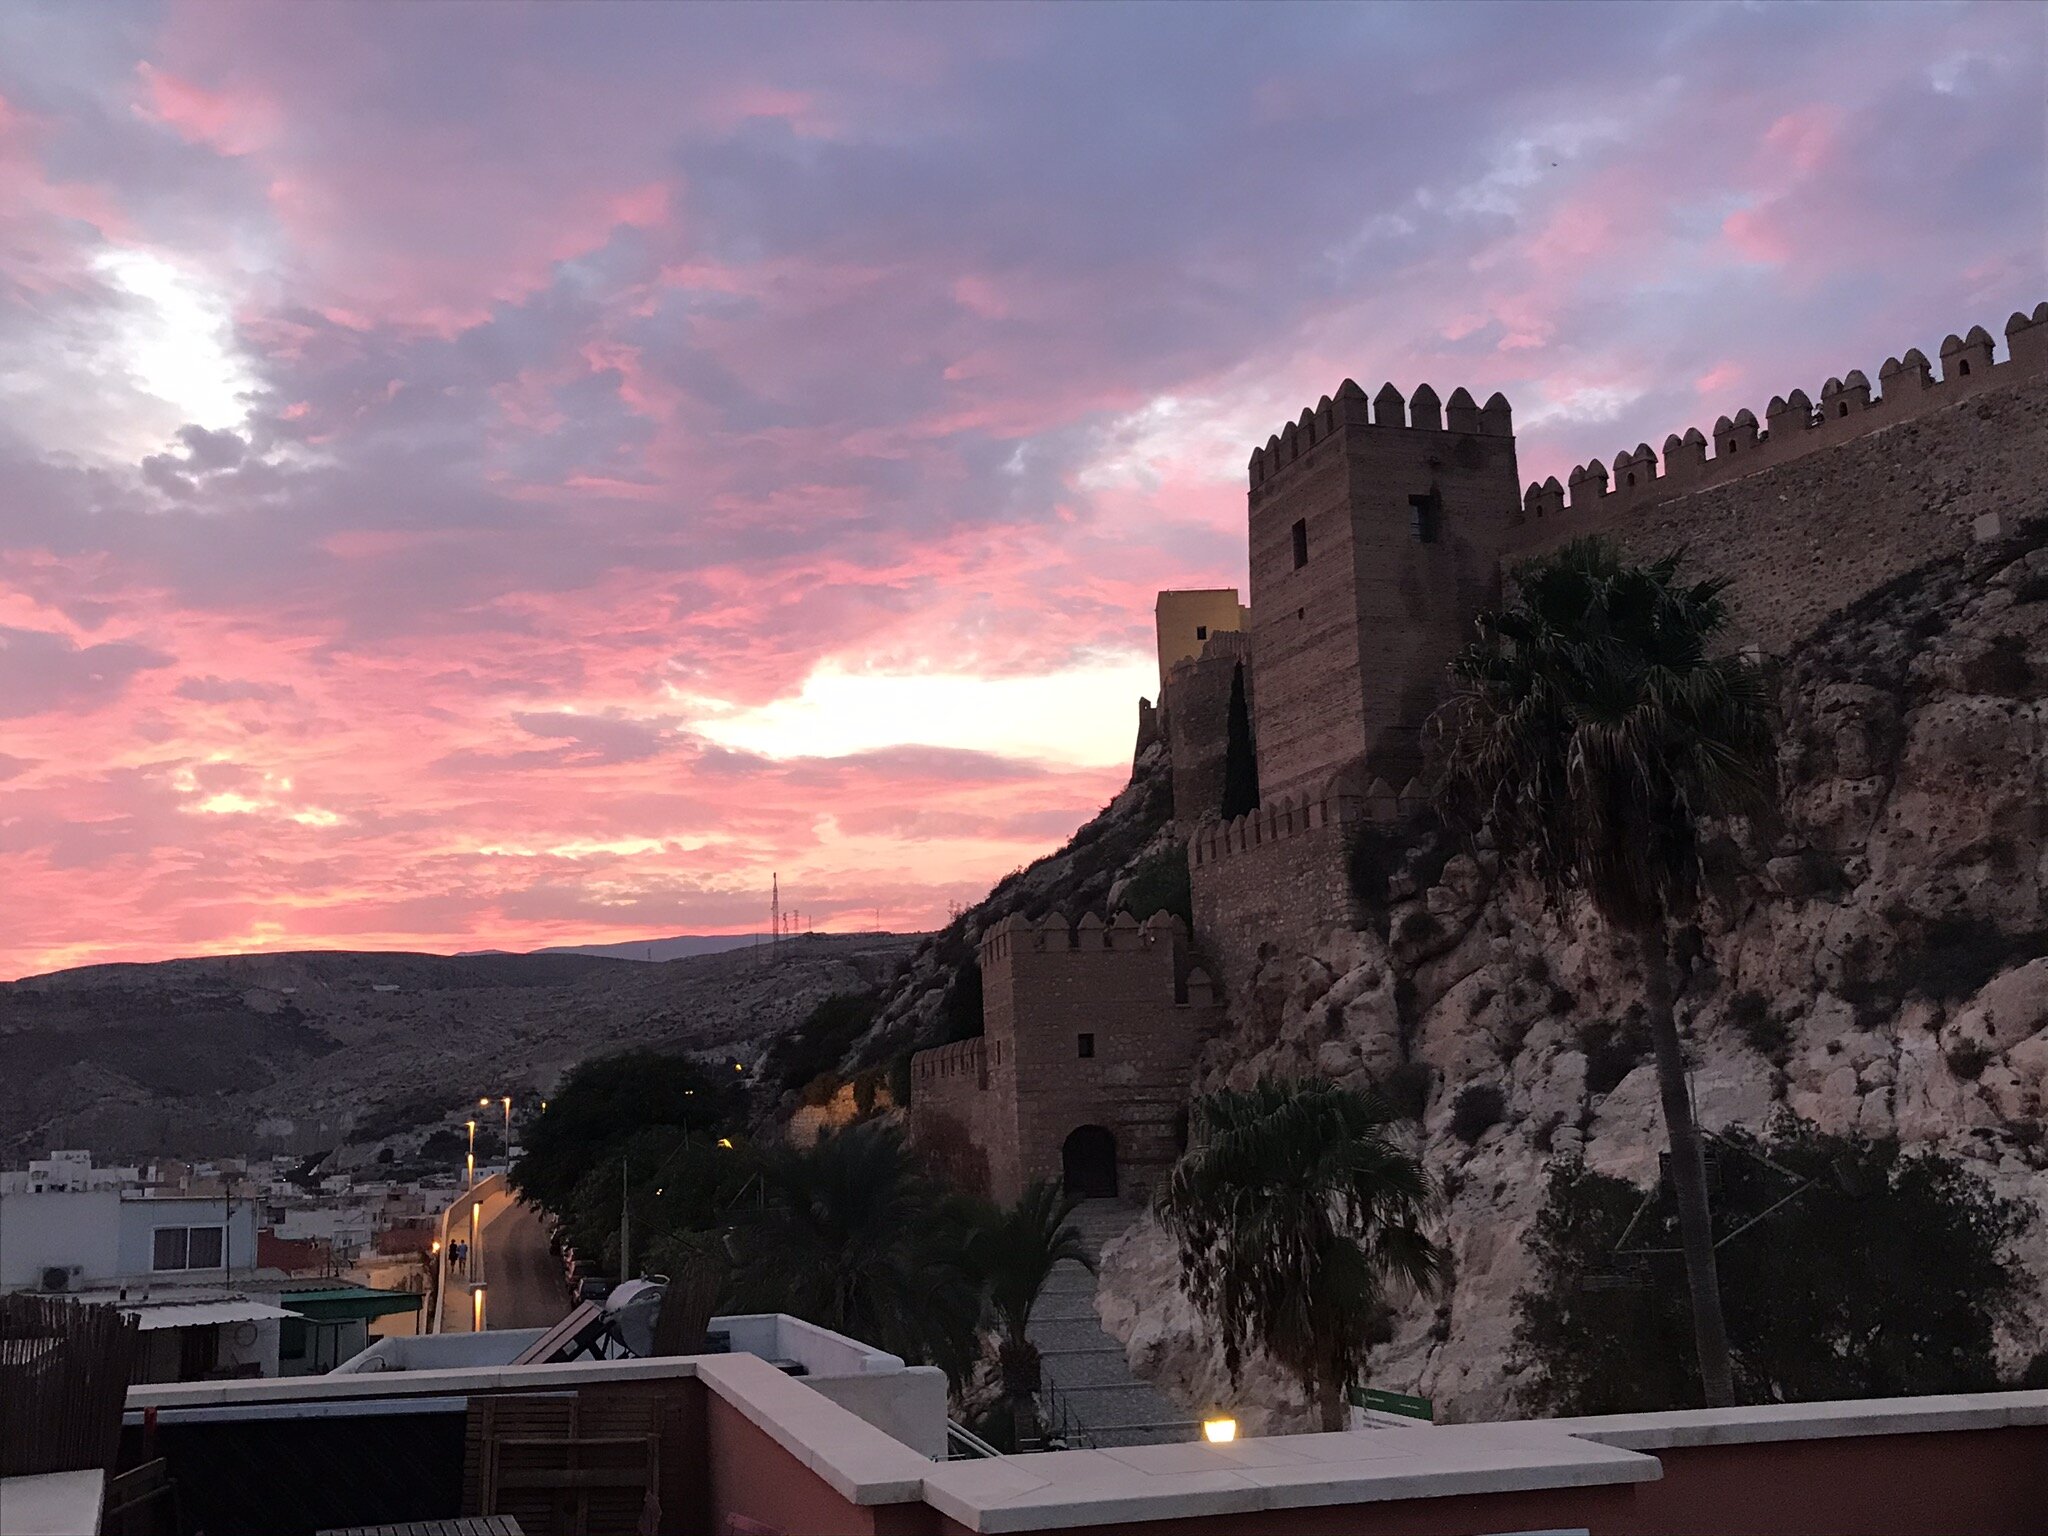 ALMERIA, Spain. October 1st, 2021. PICTURED: The sun goes down behind the Alcazabar of Almeria, seen from the roof of a local Moroccan eatery. Photo credit: Andy Corbley ©.